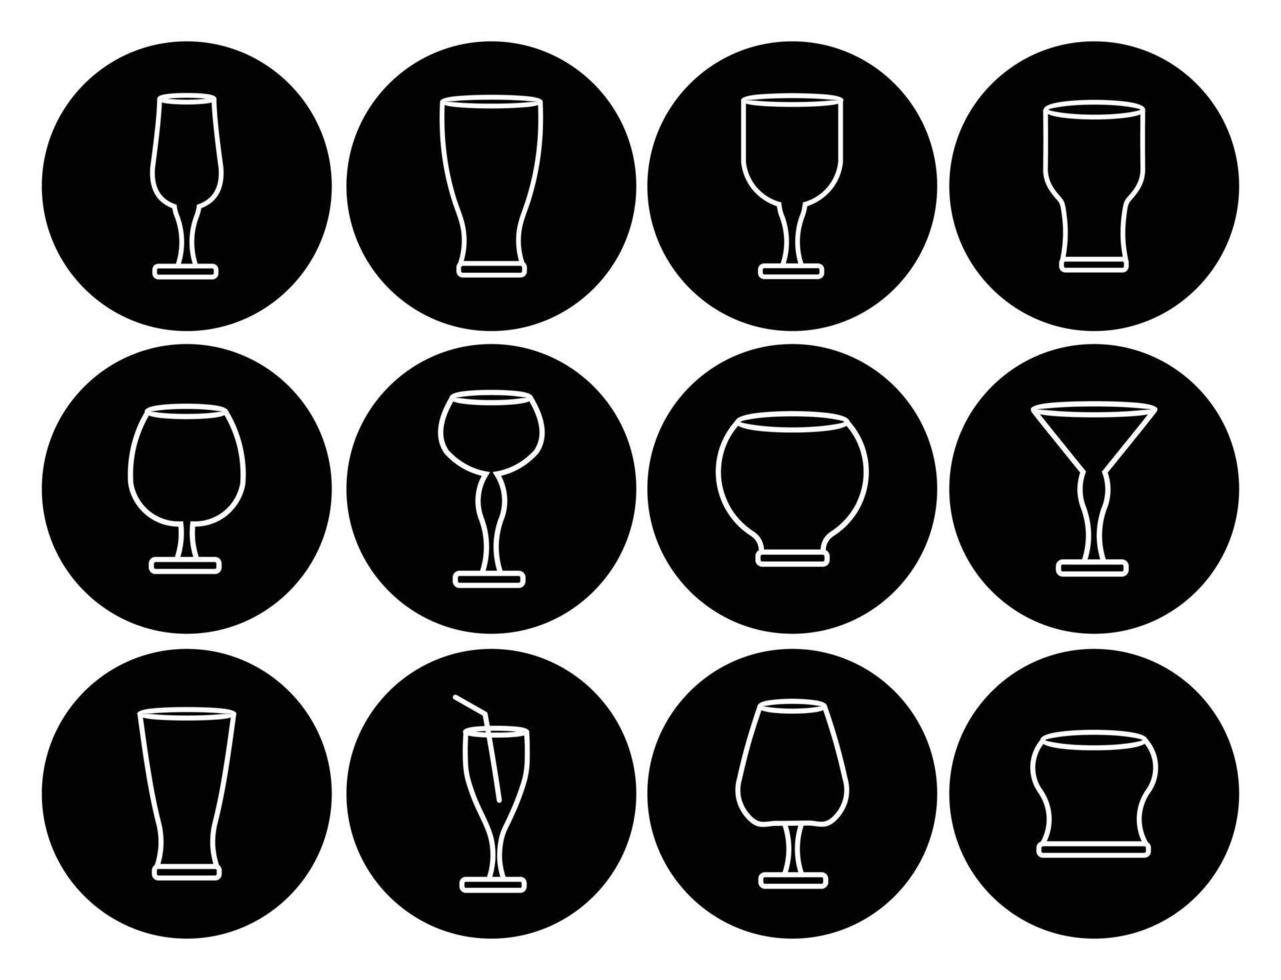 Cocktail glass line icons flat set, outline vector symbol collection, Set glass includes icons flat